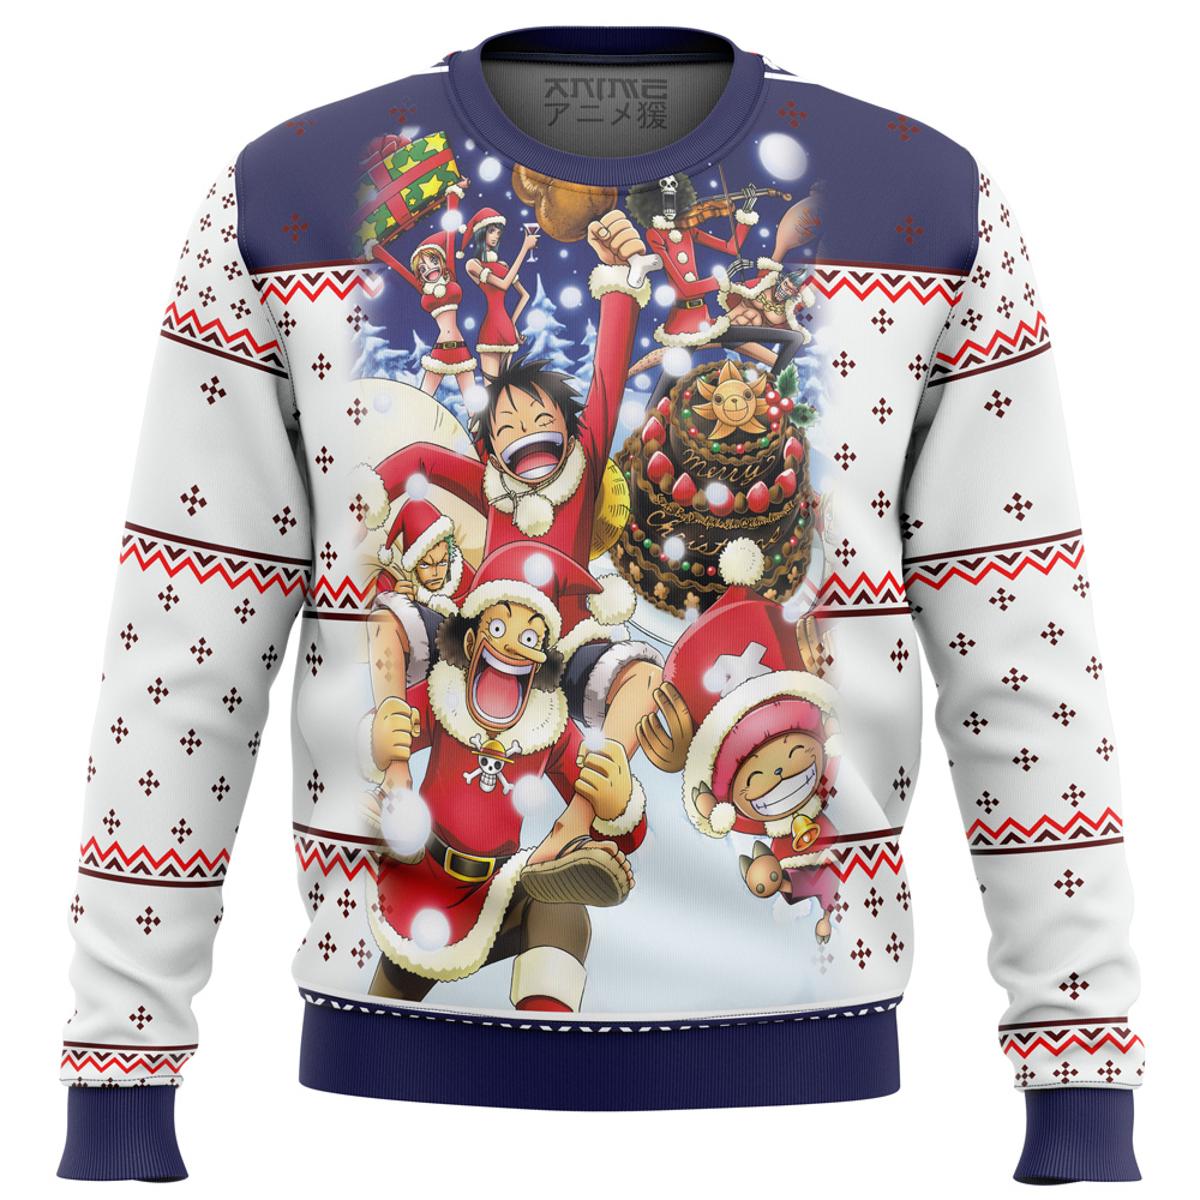 One Piece Crew Christmas Style Ugly Xmas Sweater Gift For Manga Anime Fans